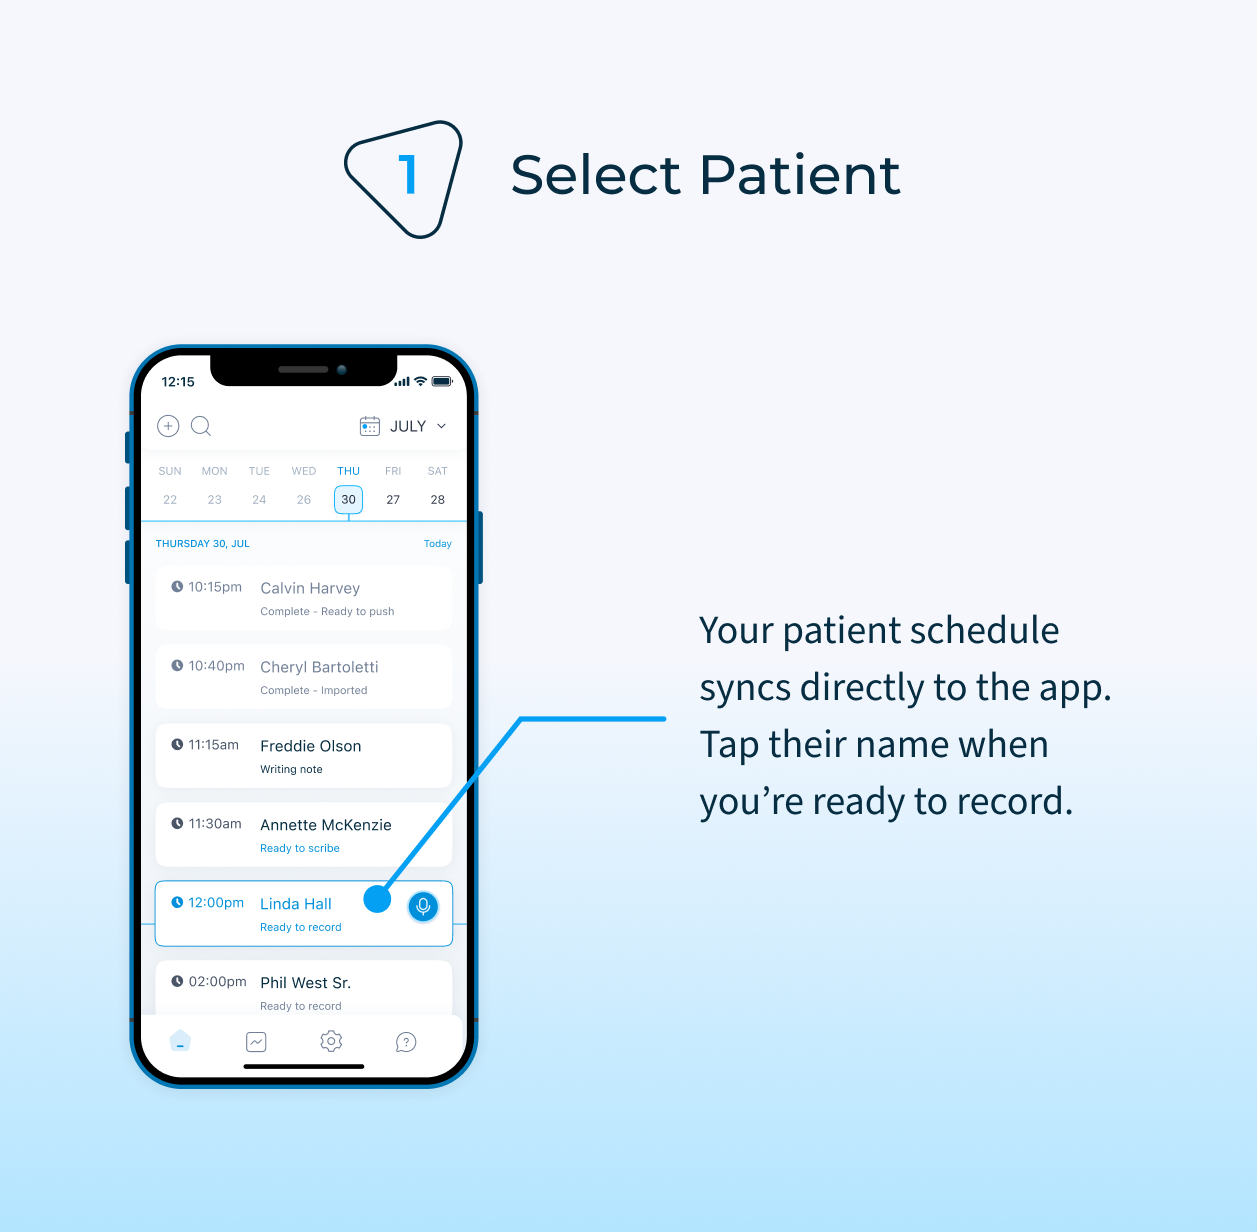 Your patient schedule is pulled directly from your EHR and synced to the DeepScribe app. When ready, select the patient name and record the visit.